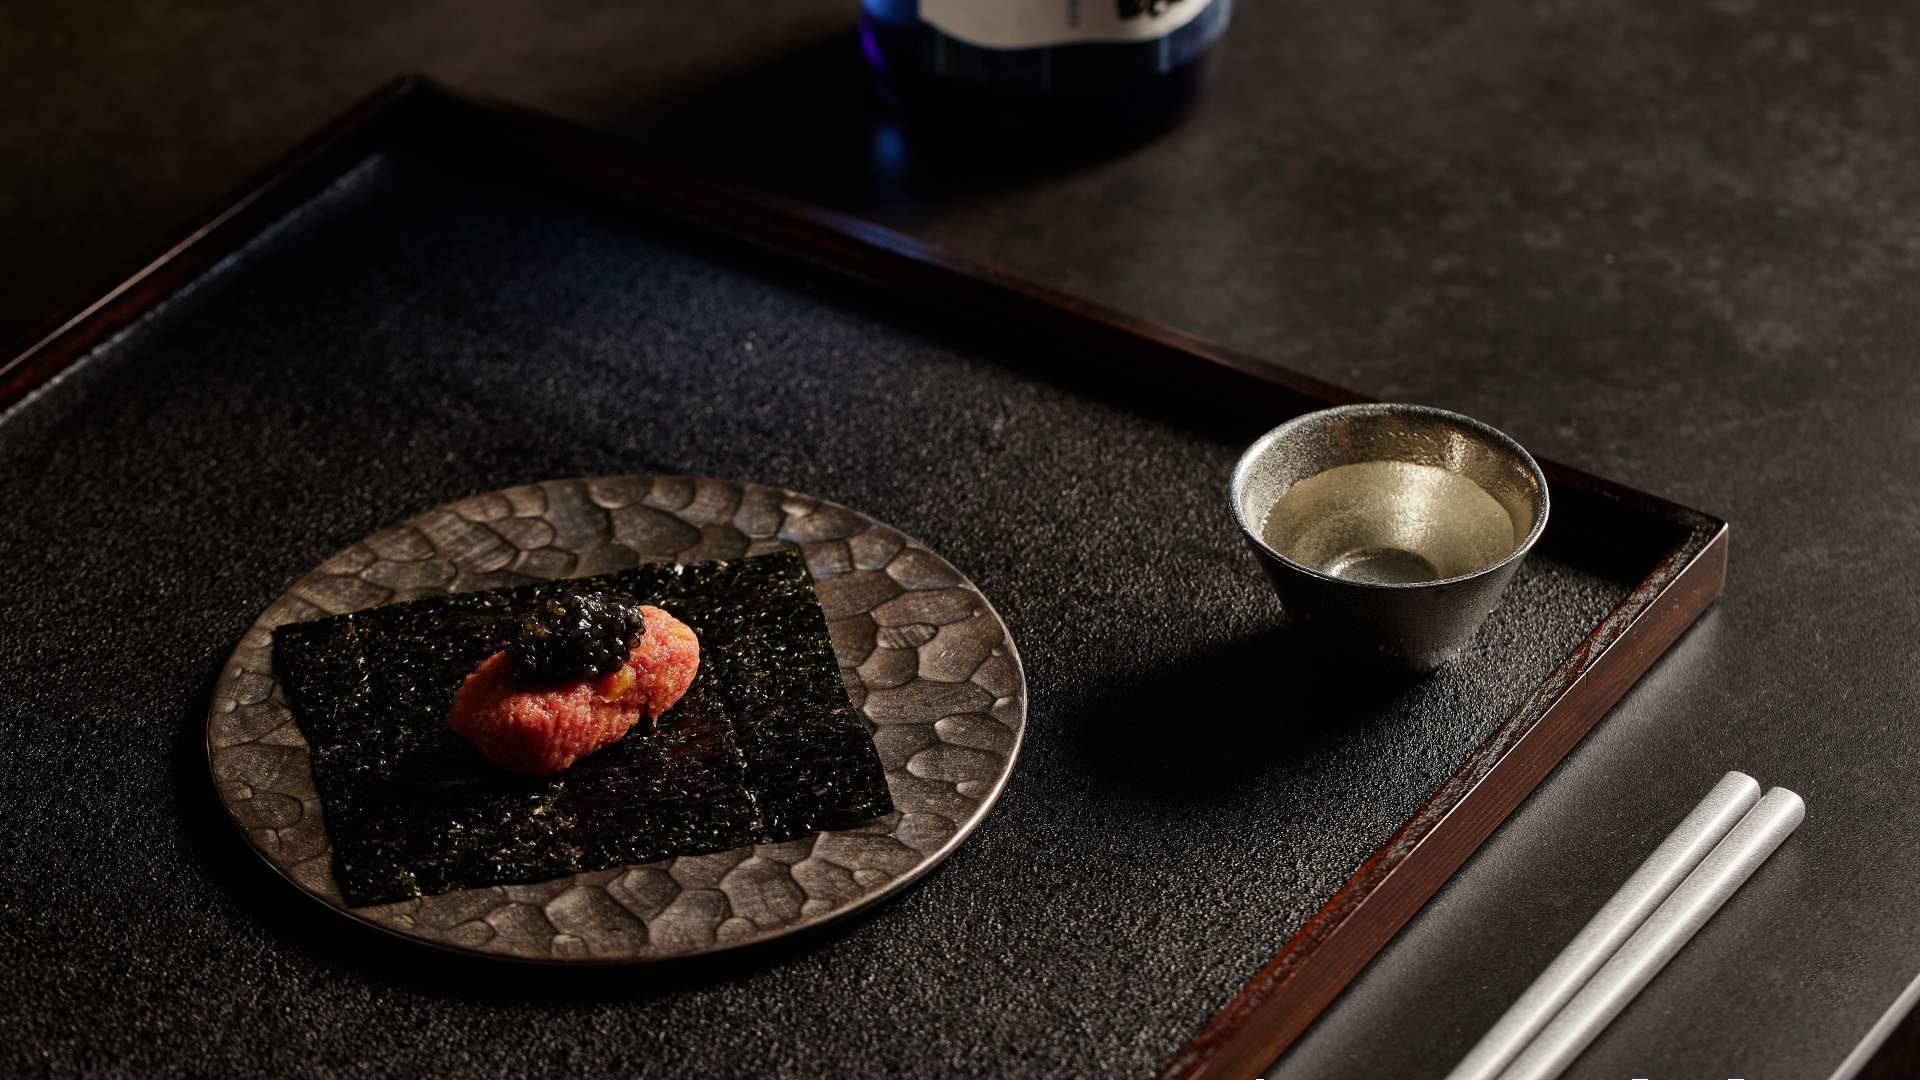 Yakikami Is South Yarra's New Japanese Barbecue Fine Diner With an Intimate Chef's Table Offering